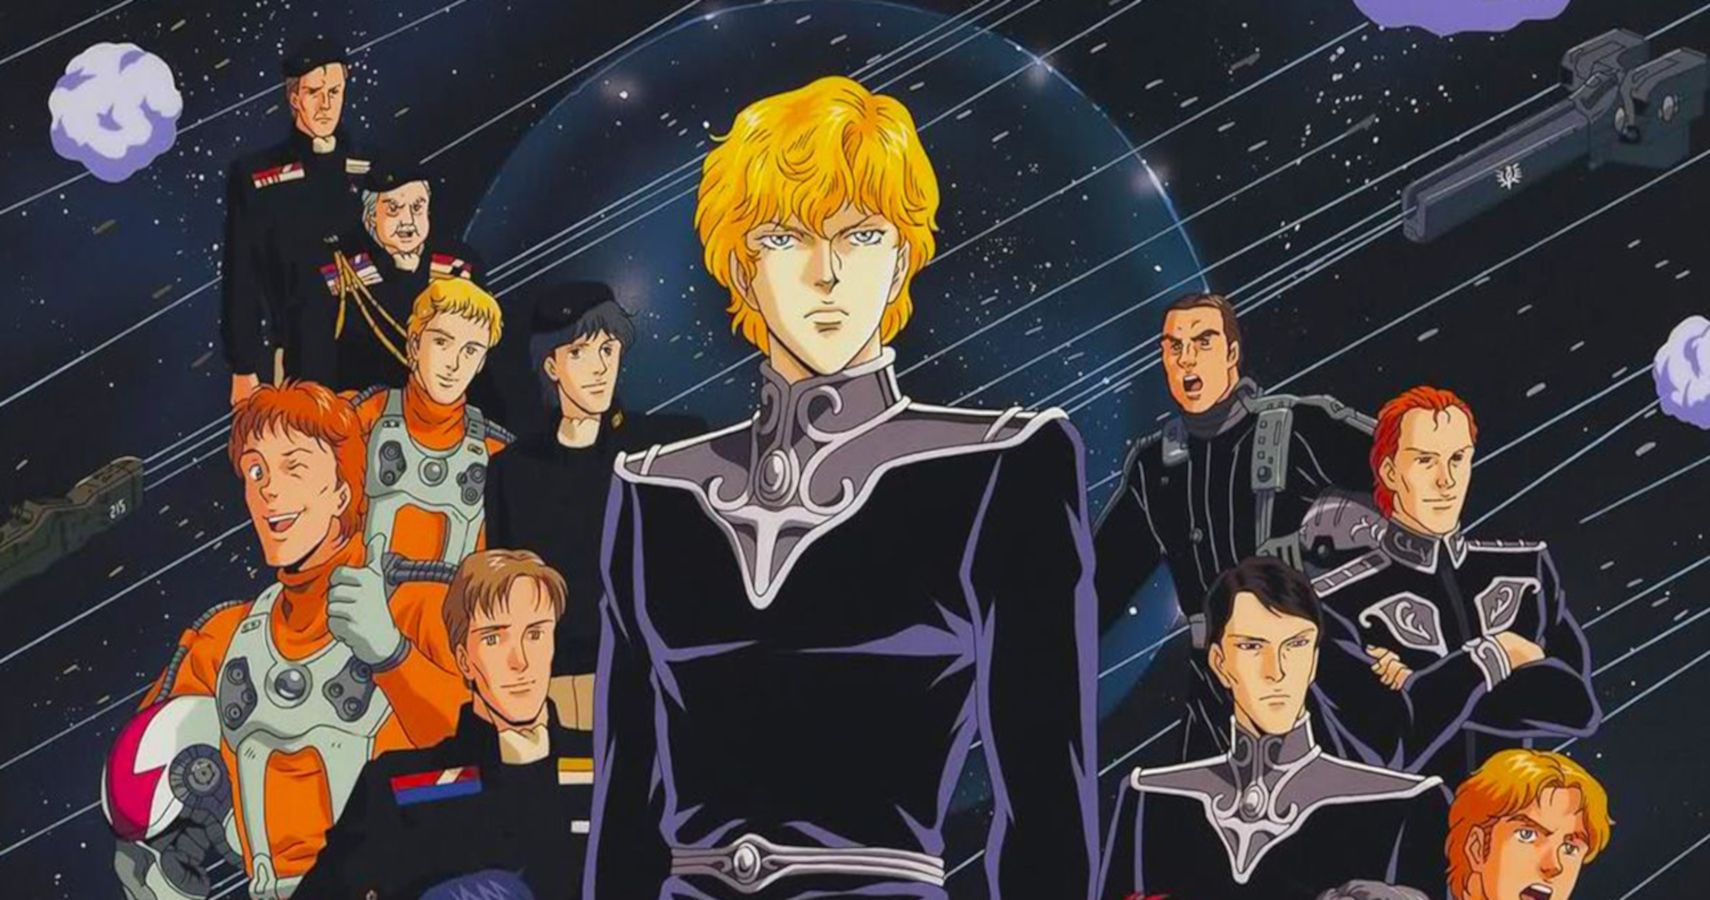 Legend of the Galactic Heroes Anime Series Complete Collection + 3 Movies |  eBay